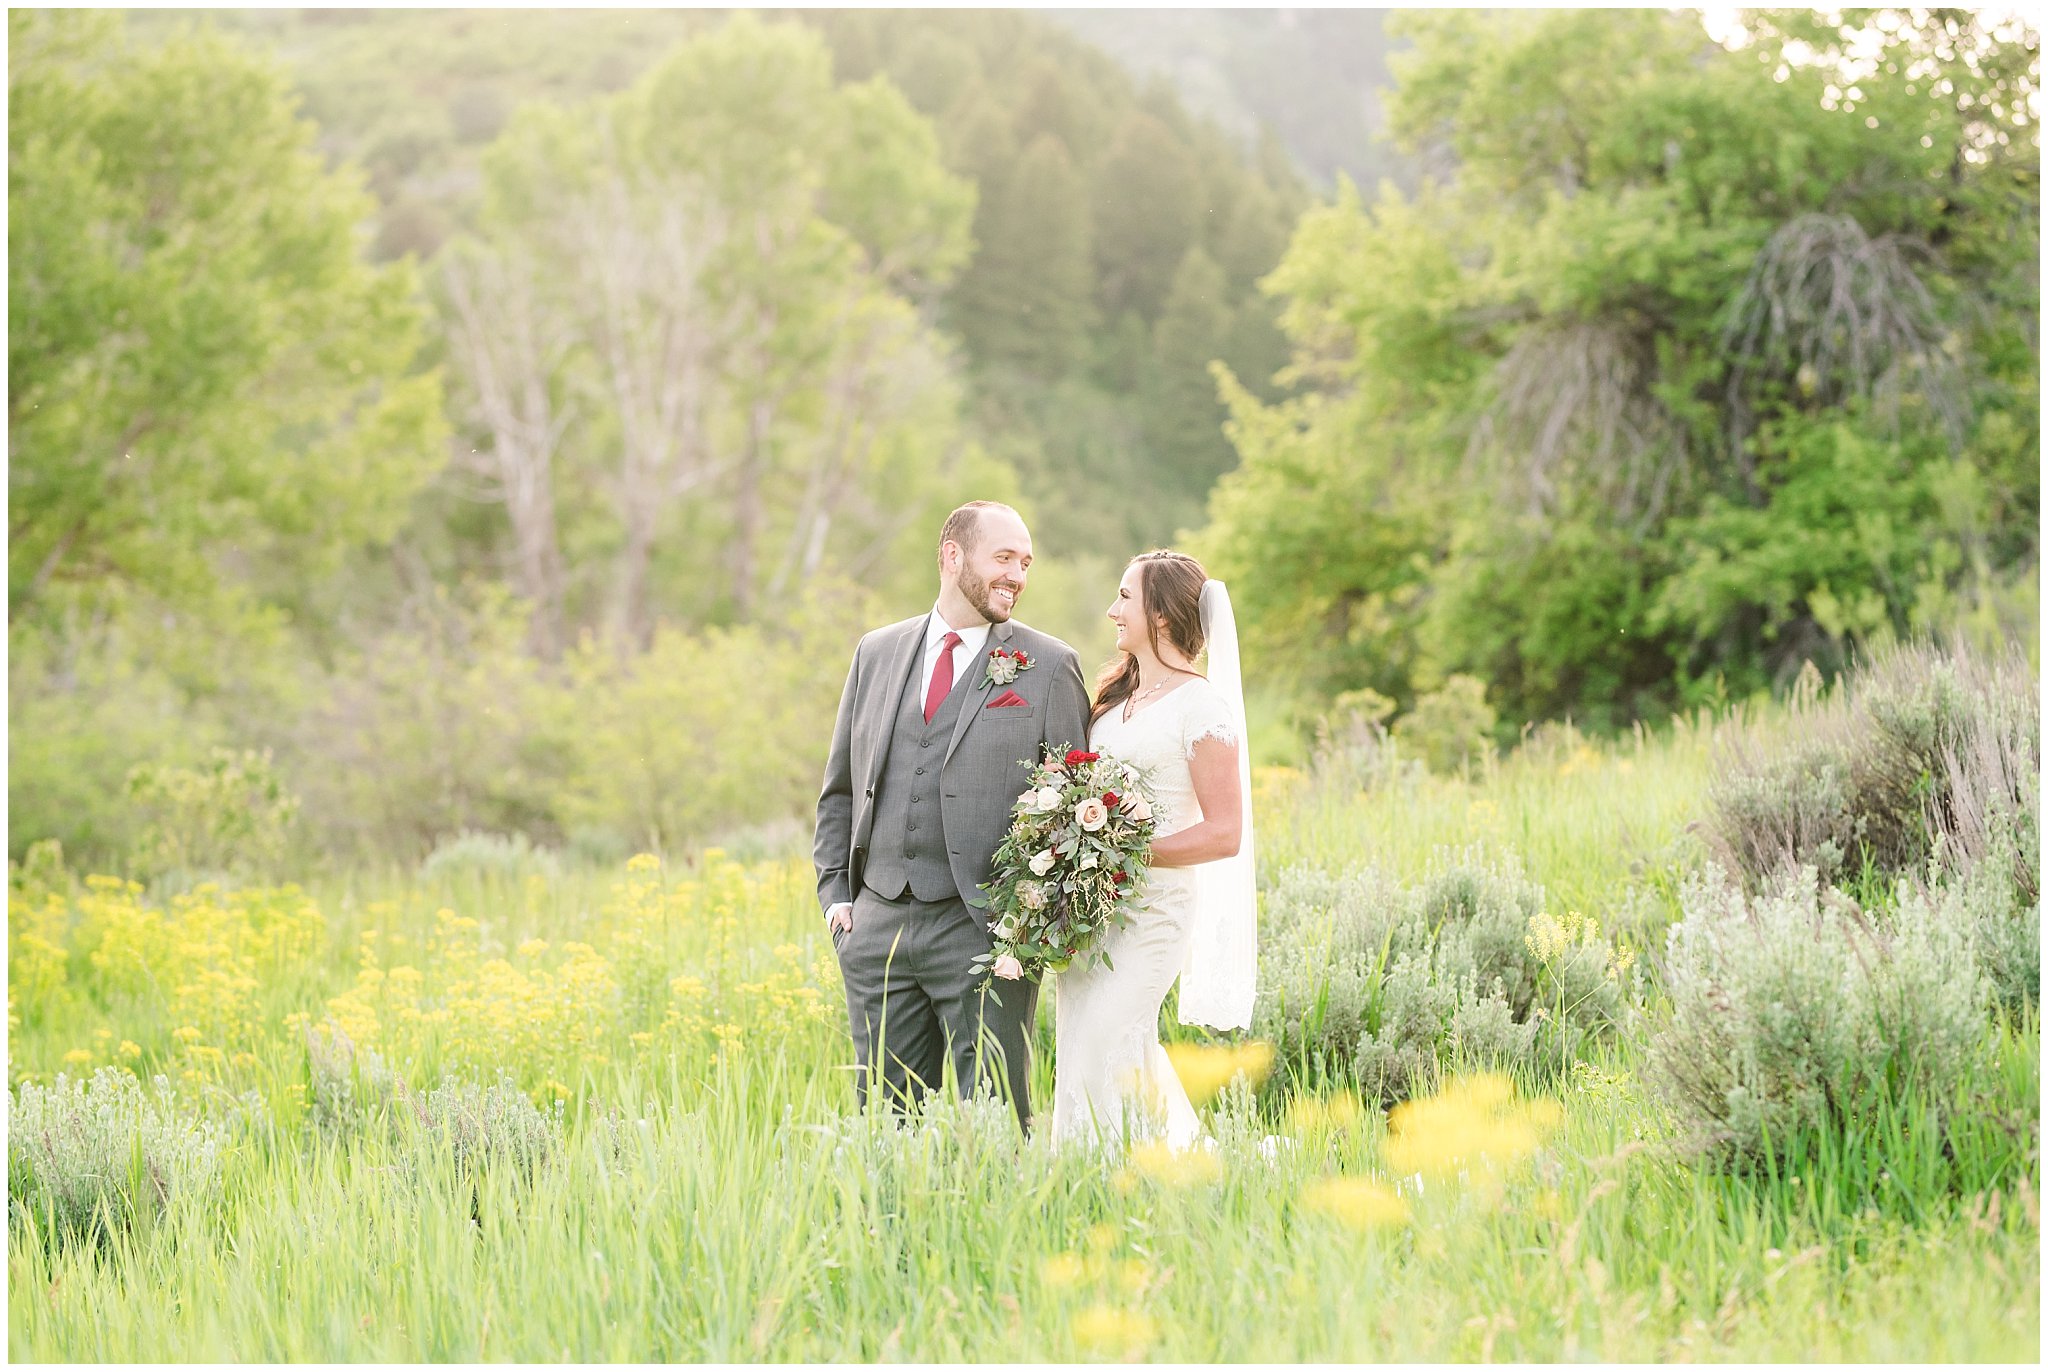 Bride and groom portraits in the mountains | Groom in grey suit and bride in beige and white dress with waterfall bouquet | Snowbasin Summer Formal Session | Utah Wedding Photographers | Jessie and Dallin